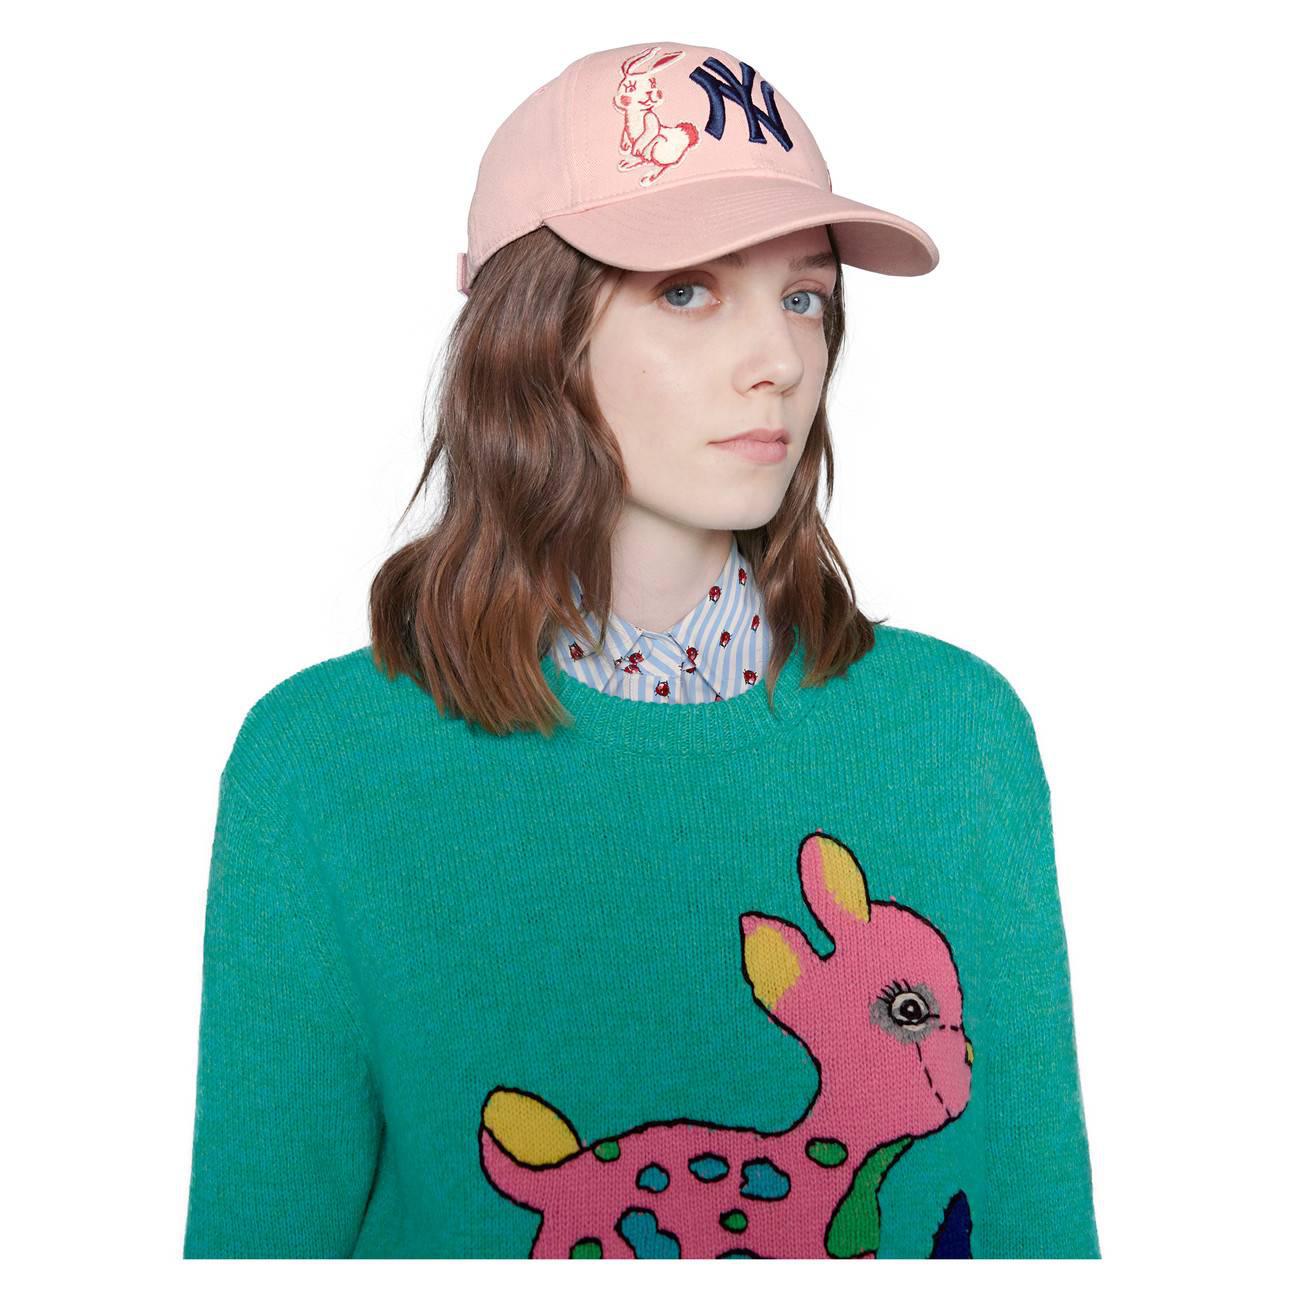 Gucci Baseball Cap With Ny Yankeestm Patch in Pink | Lyst